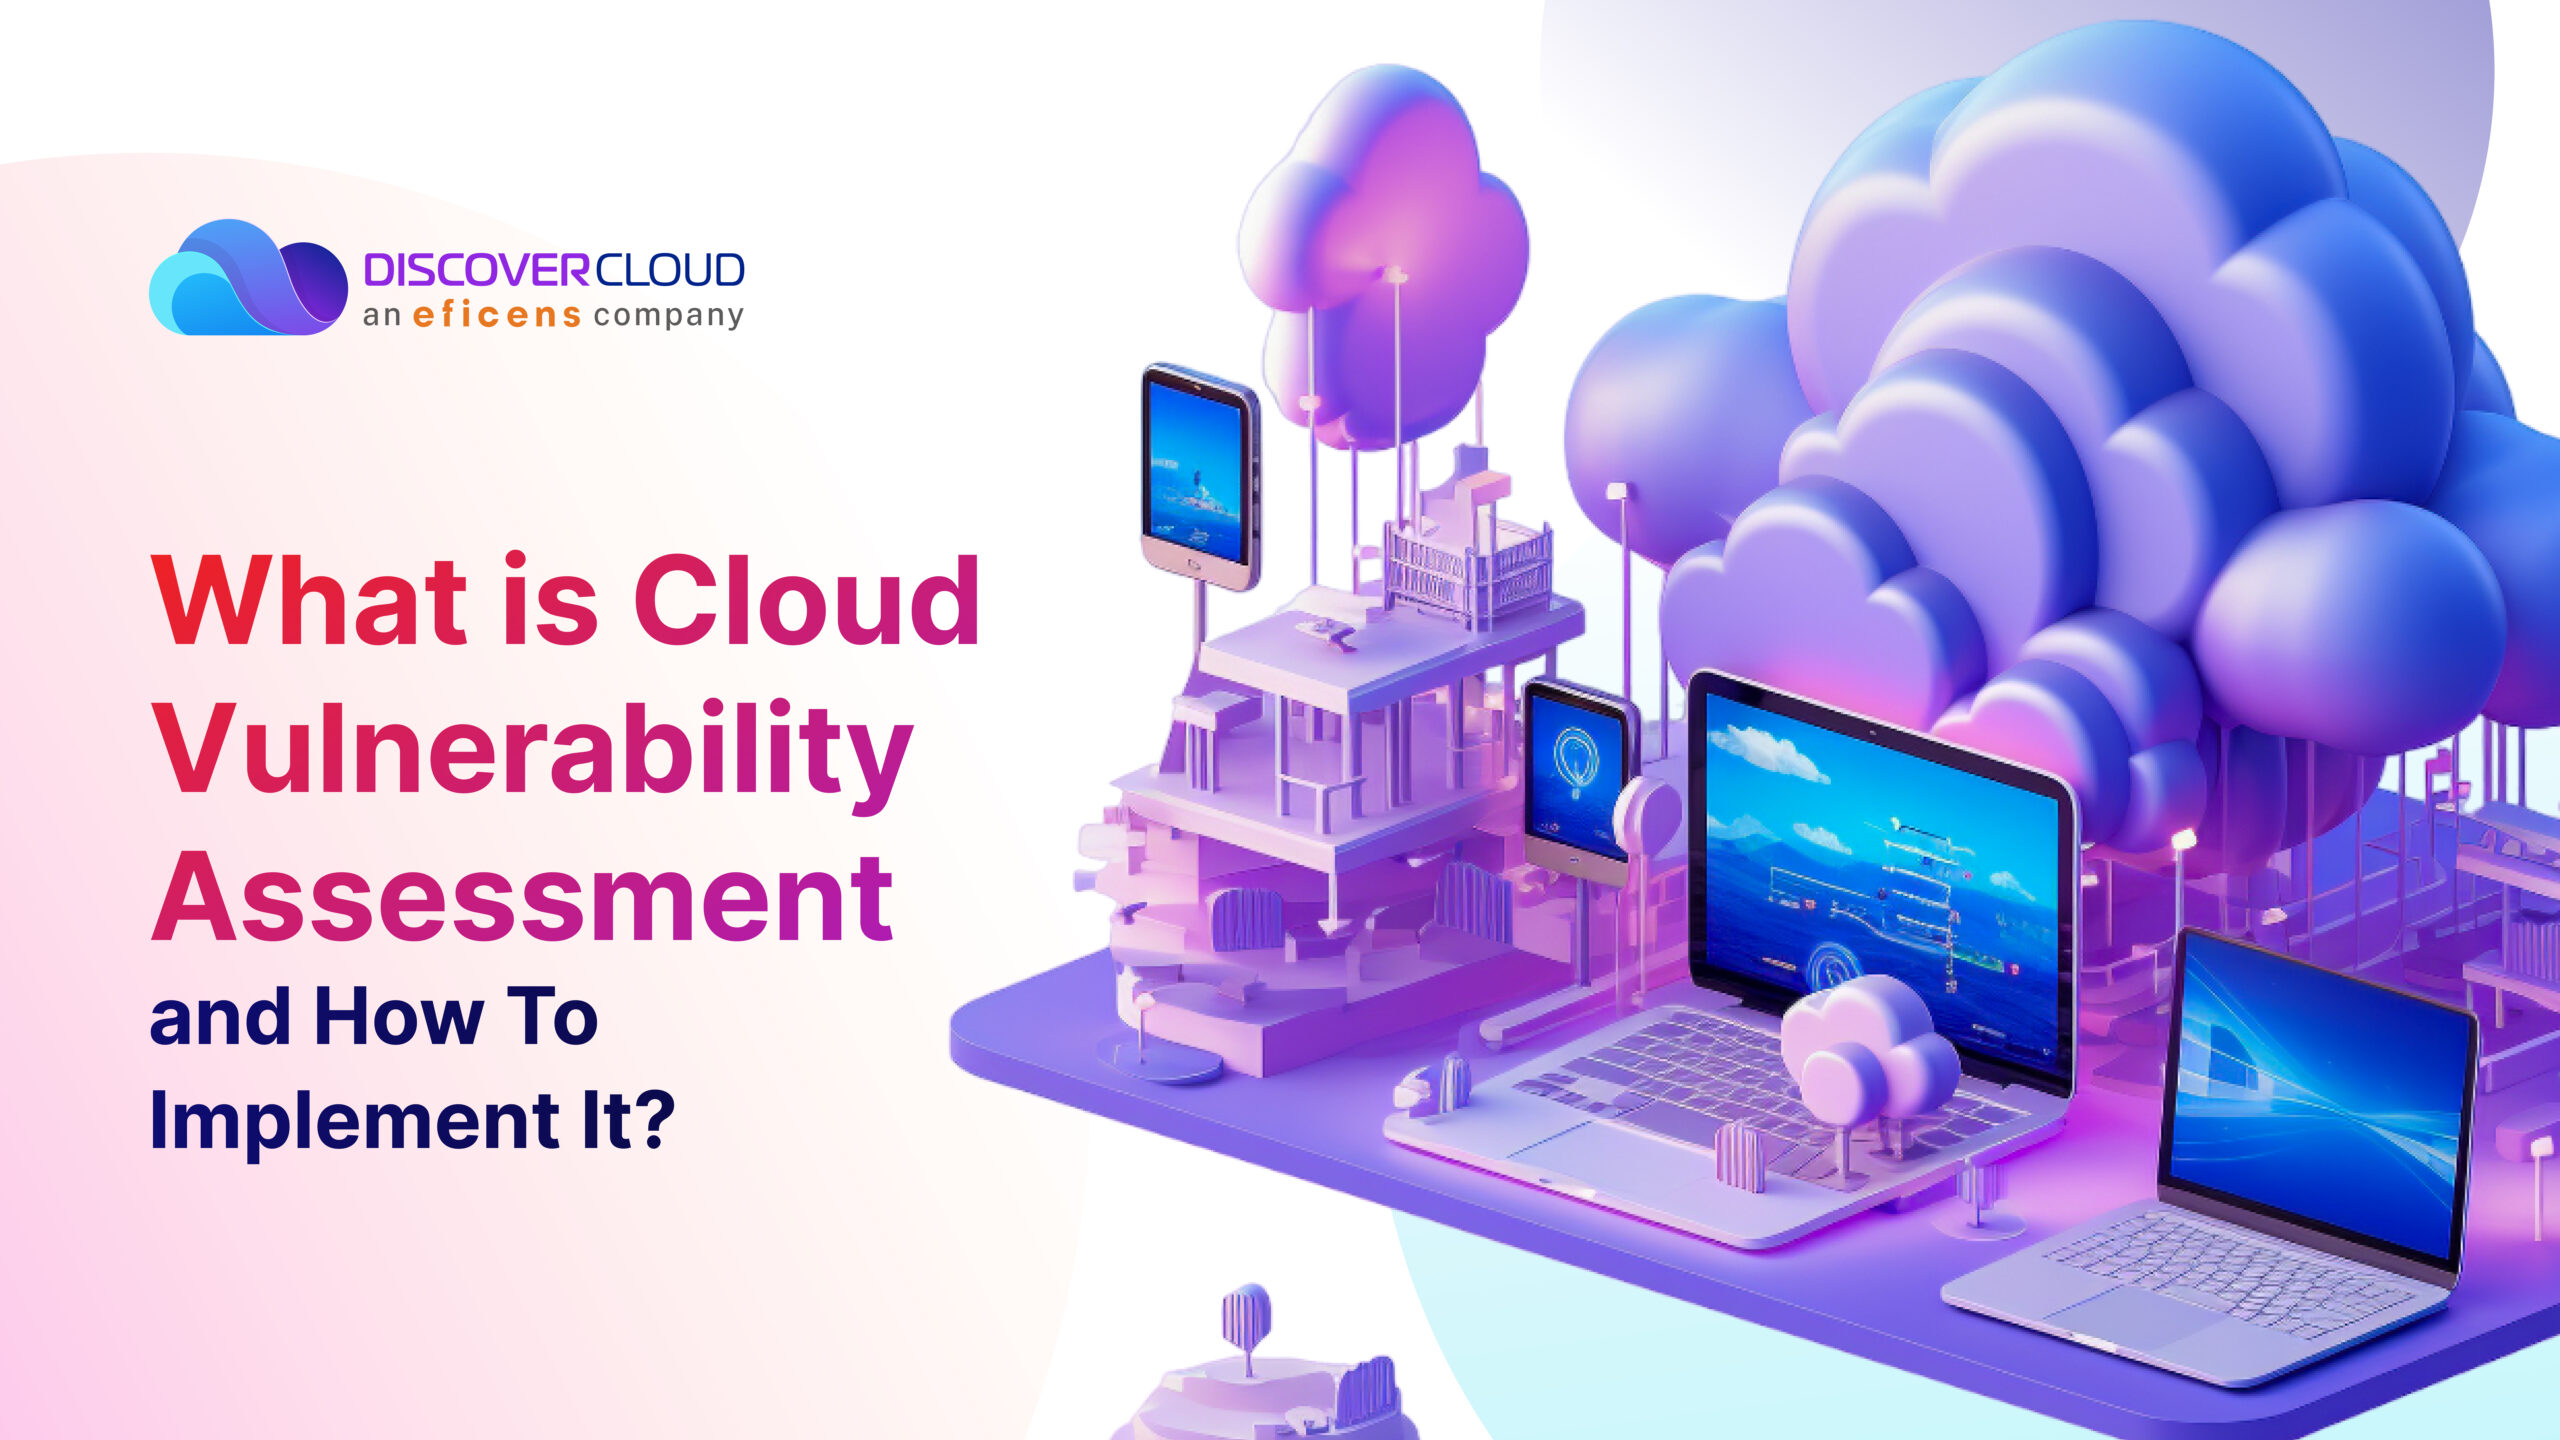 What Is Cloud Vulnerability Assessment And How To Implement It?